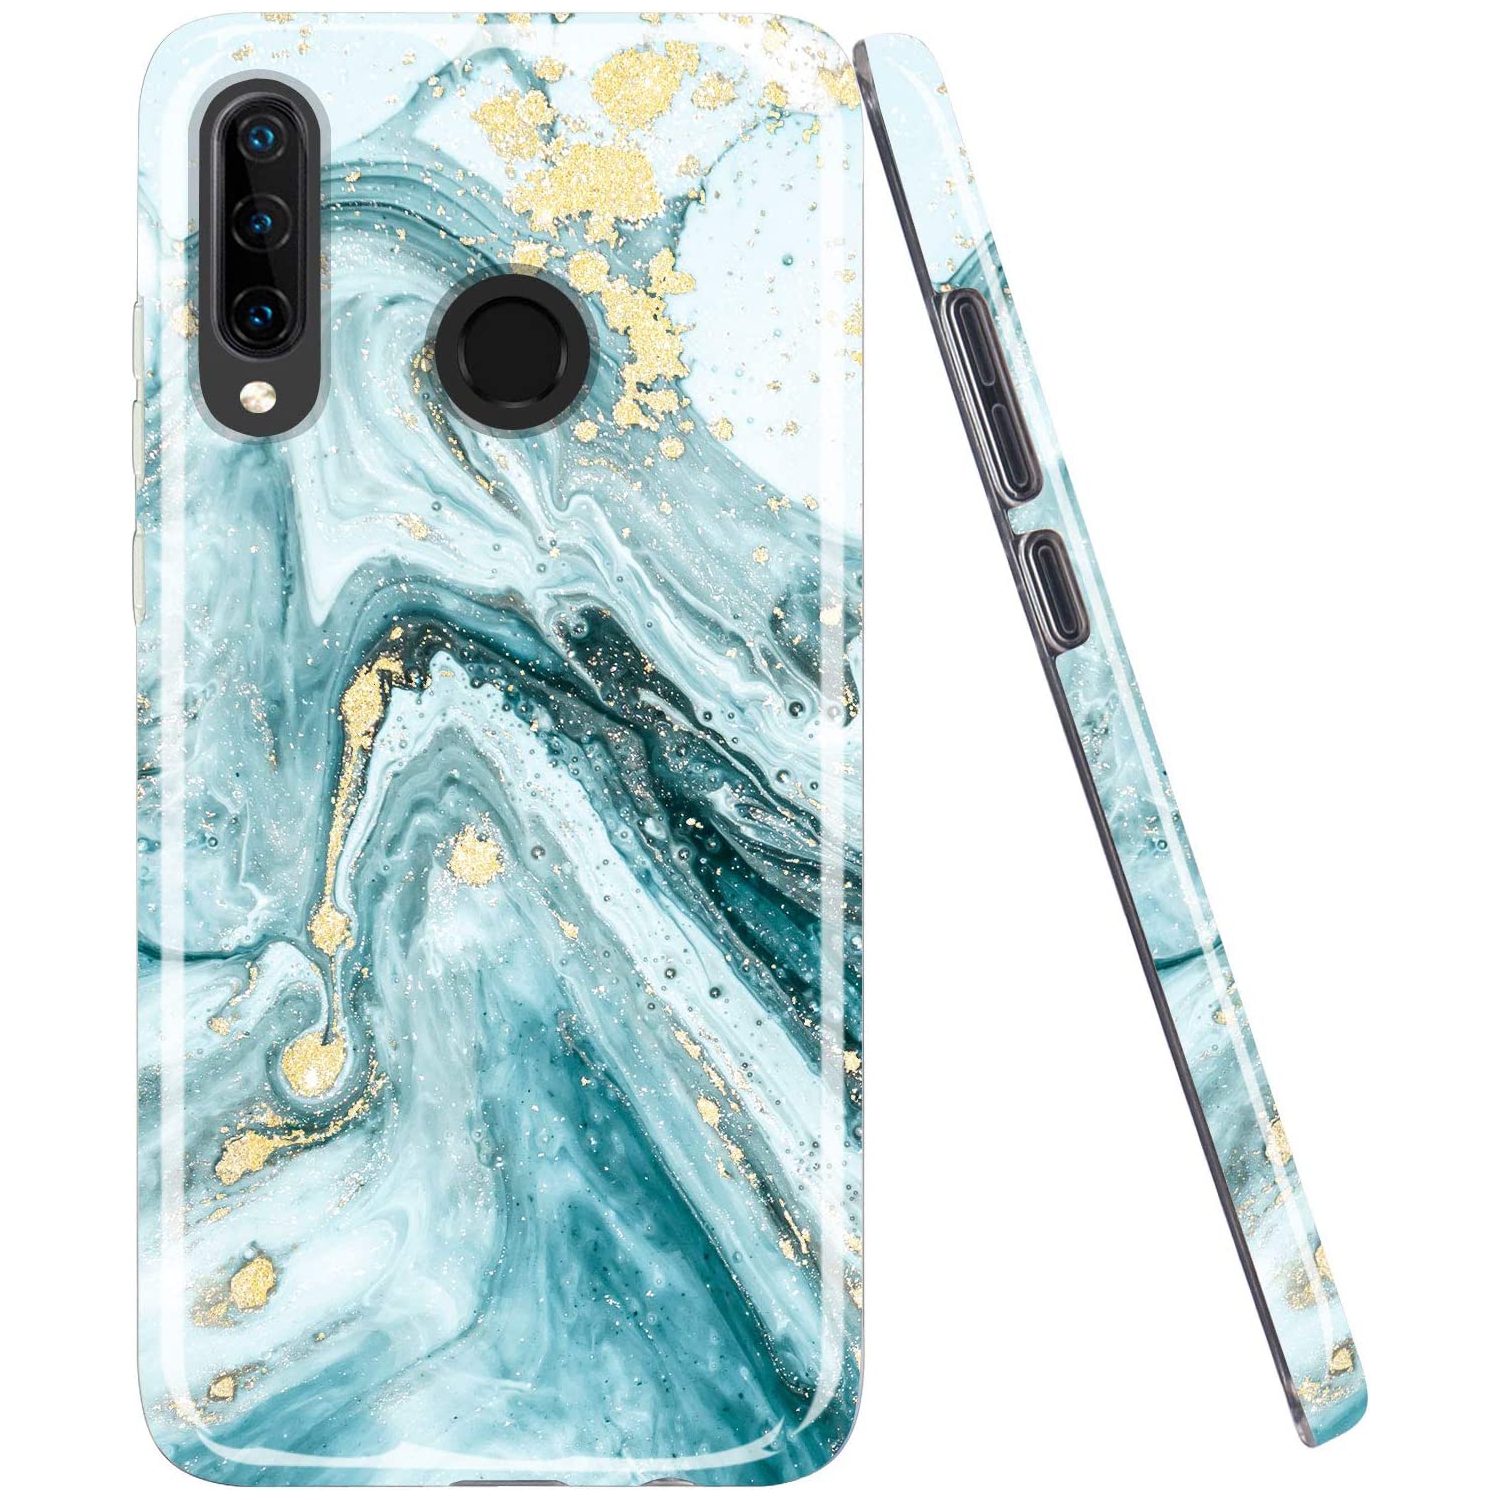 Compatible Huawei P30 lite Case Black Marble Design Clear Bumper Glossy TPU Soft Rubber Silicone Cover Phone